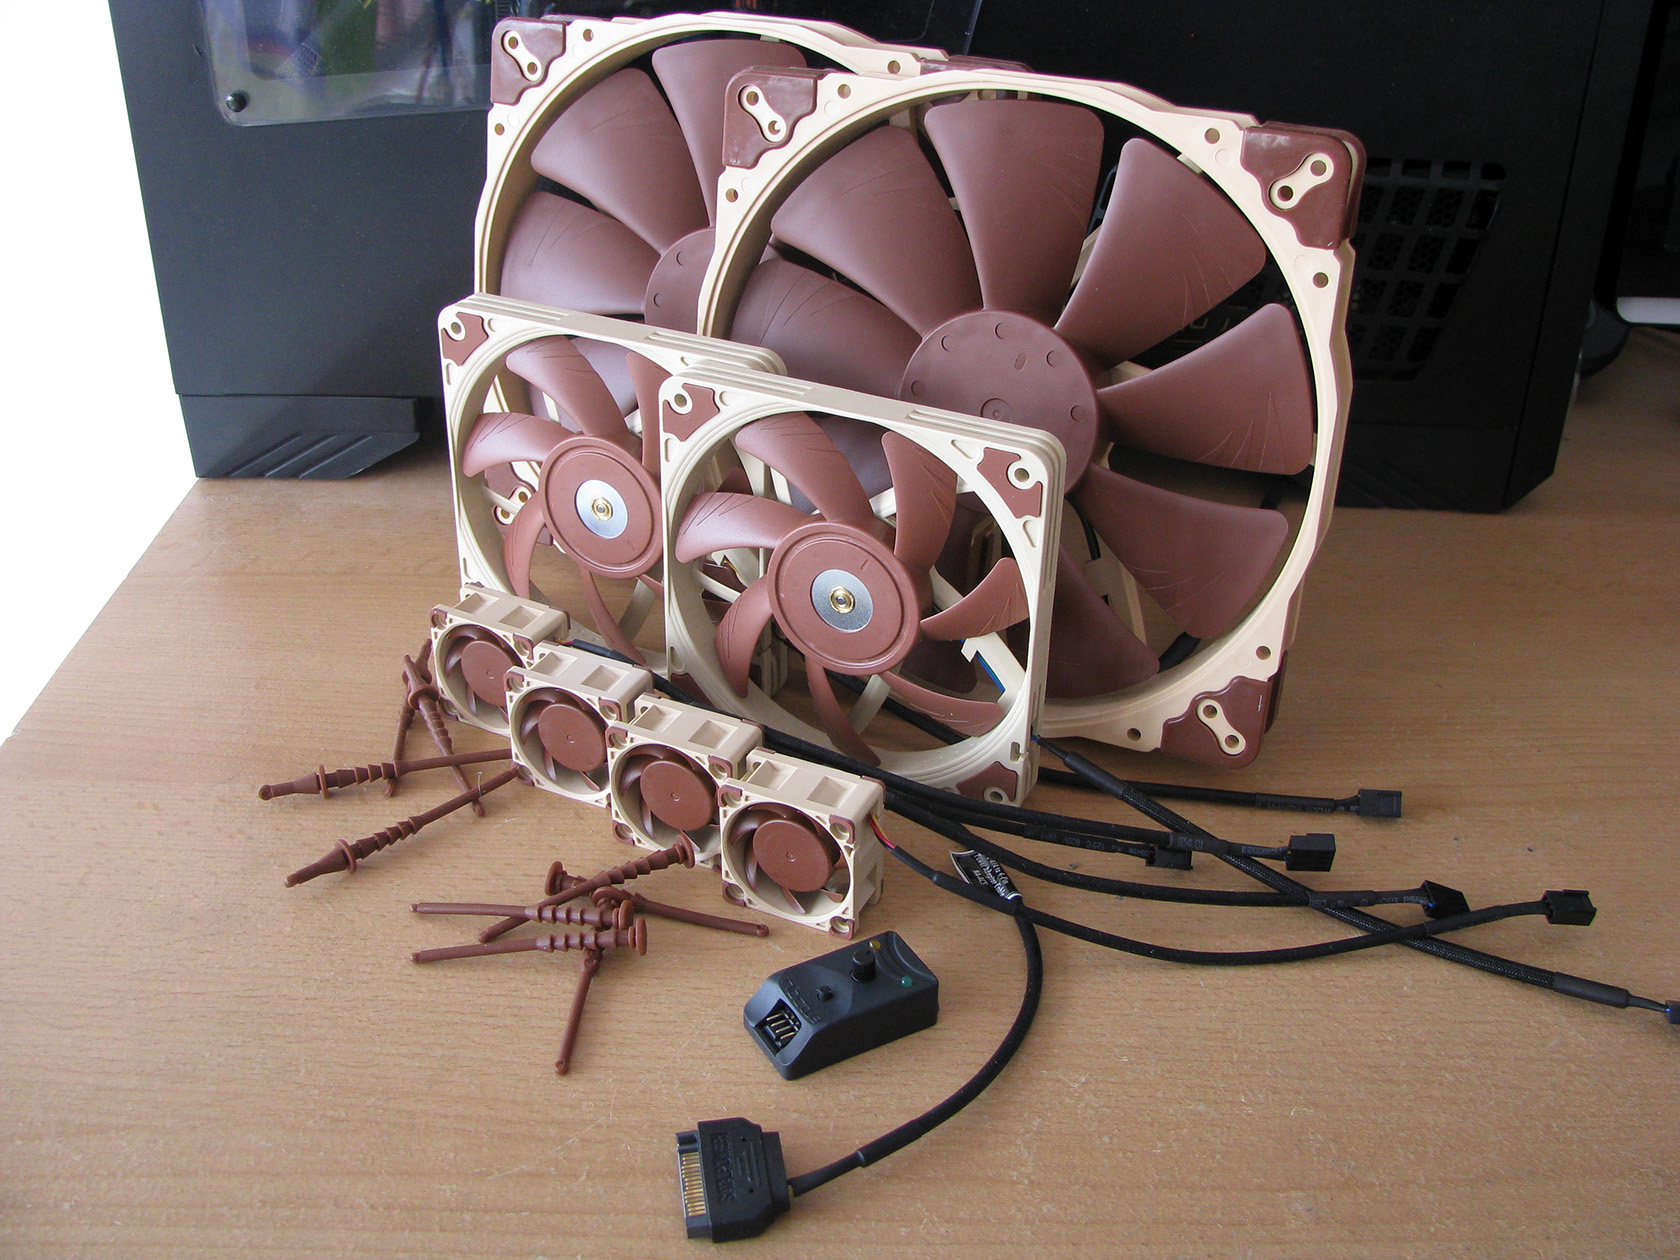 Noctua Nf A12x15 Flx And Nf A12x15 Pwm Test And Review in measurements 1680 X 1260